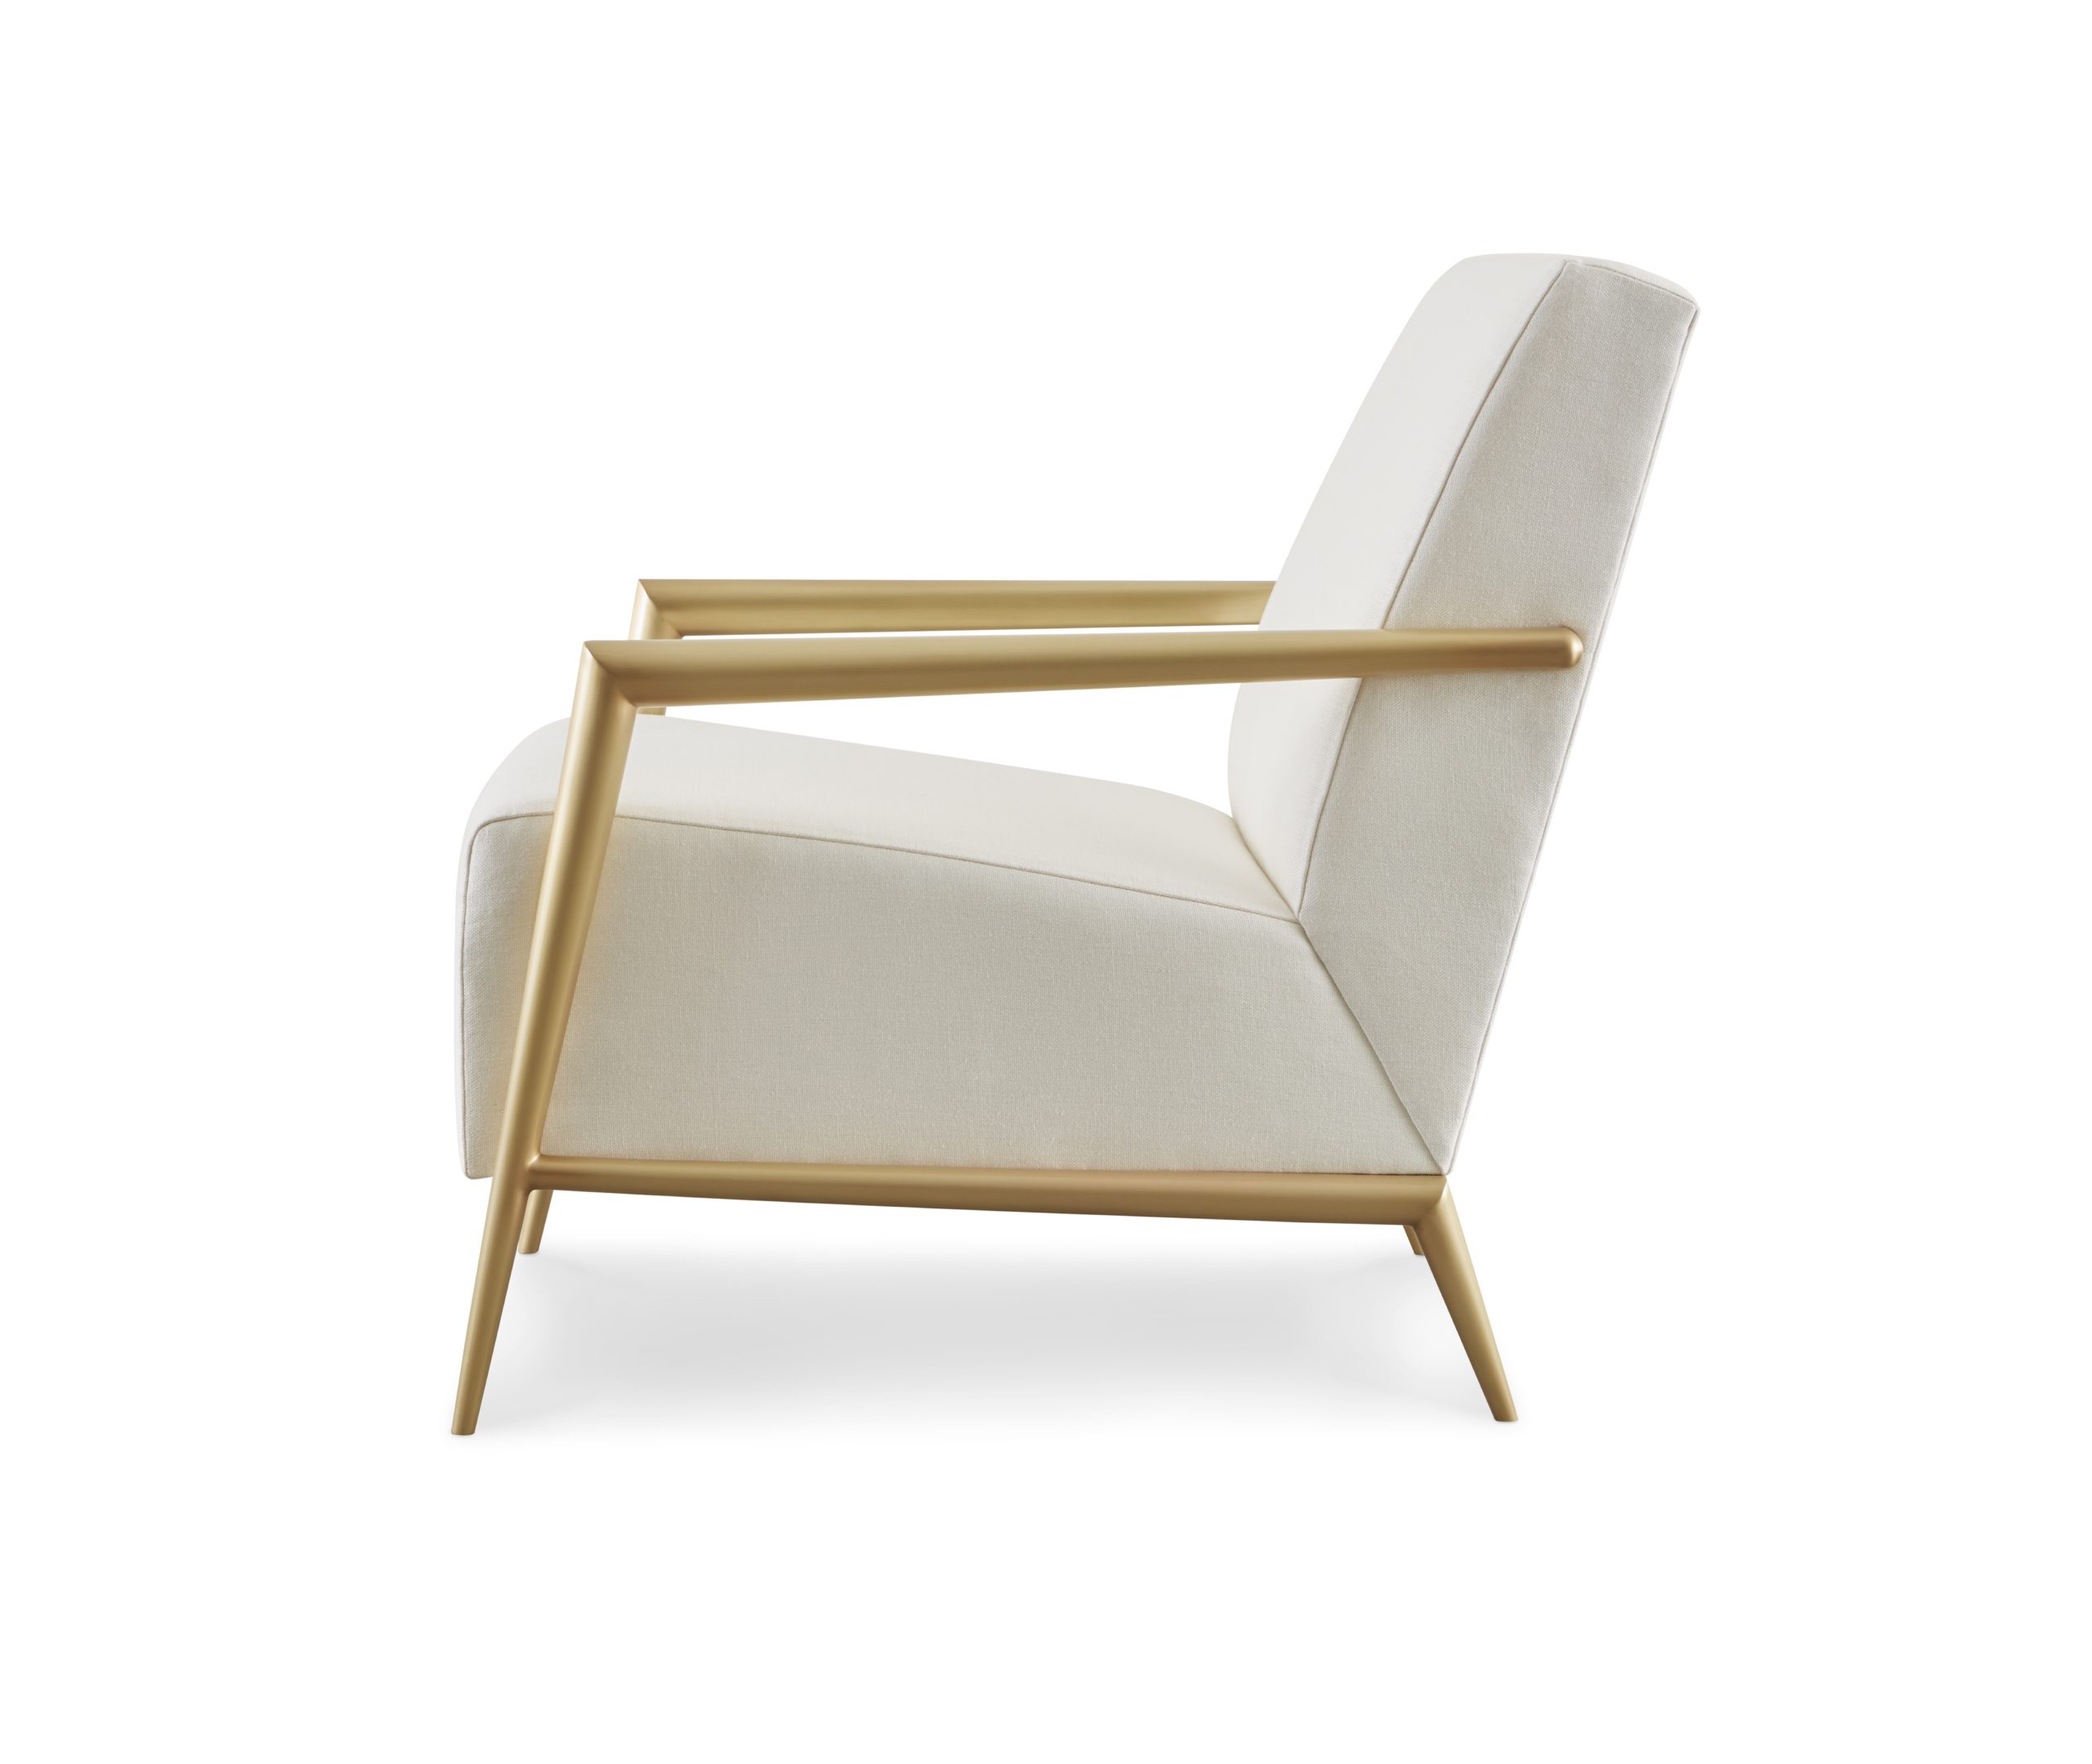 Baker_products_WNWN_enzo_lounge_chair_BAU3104c_SIDE-scaled-2